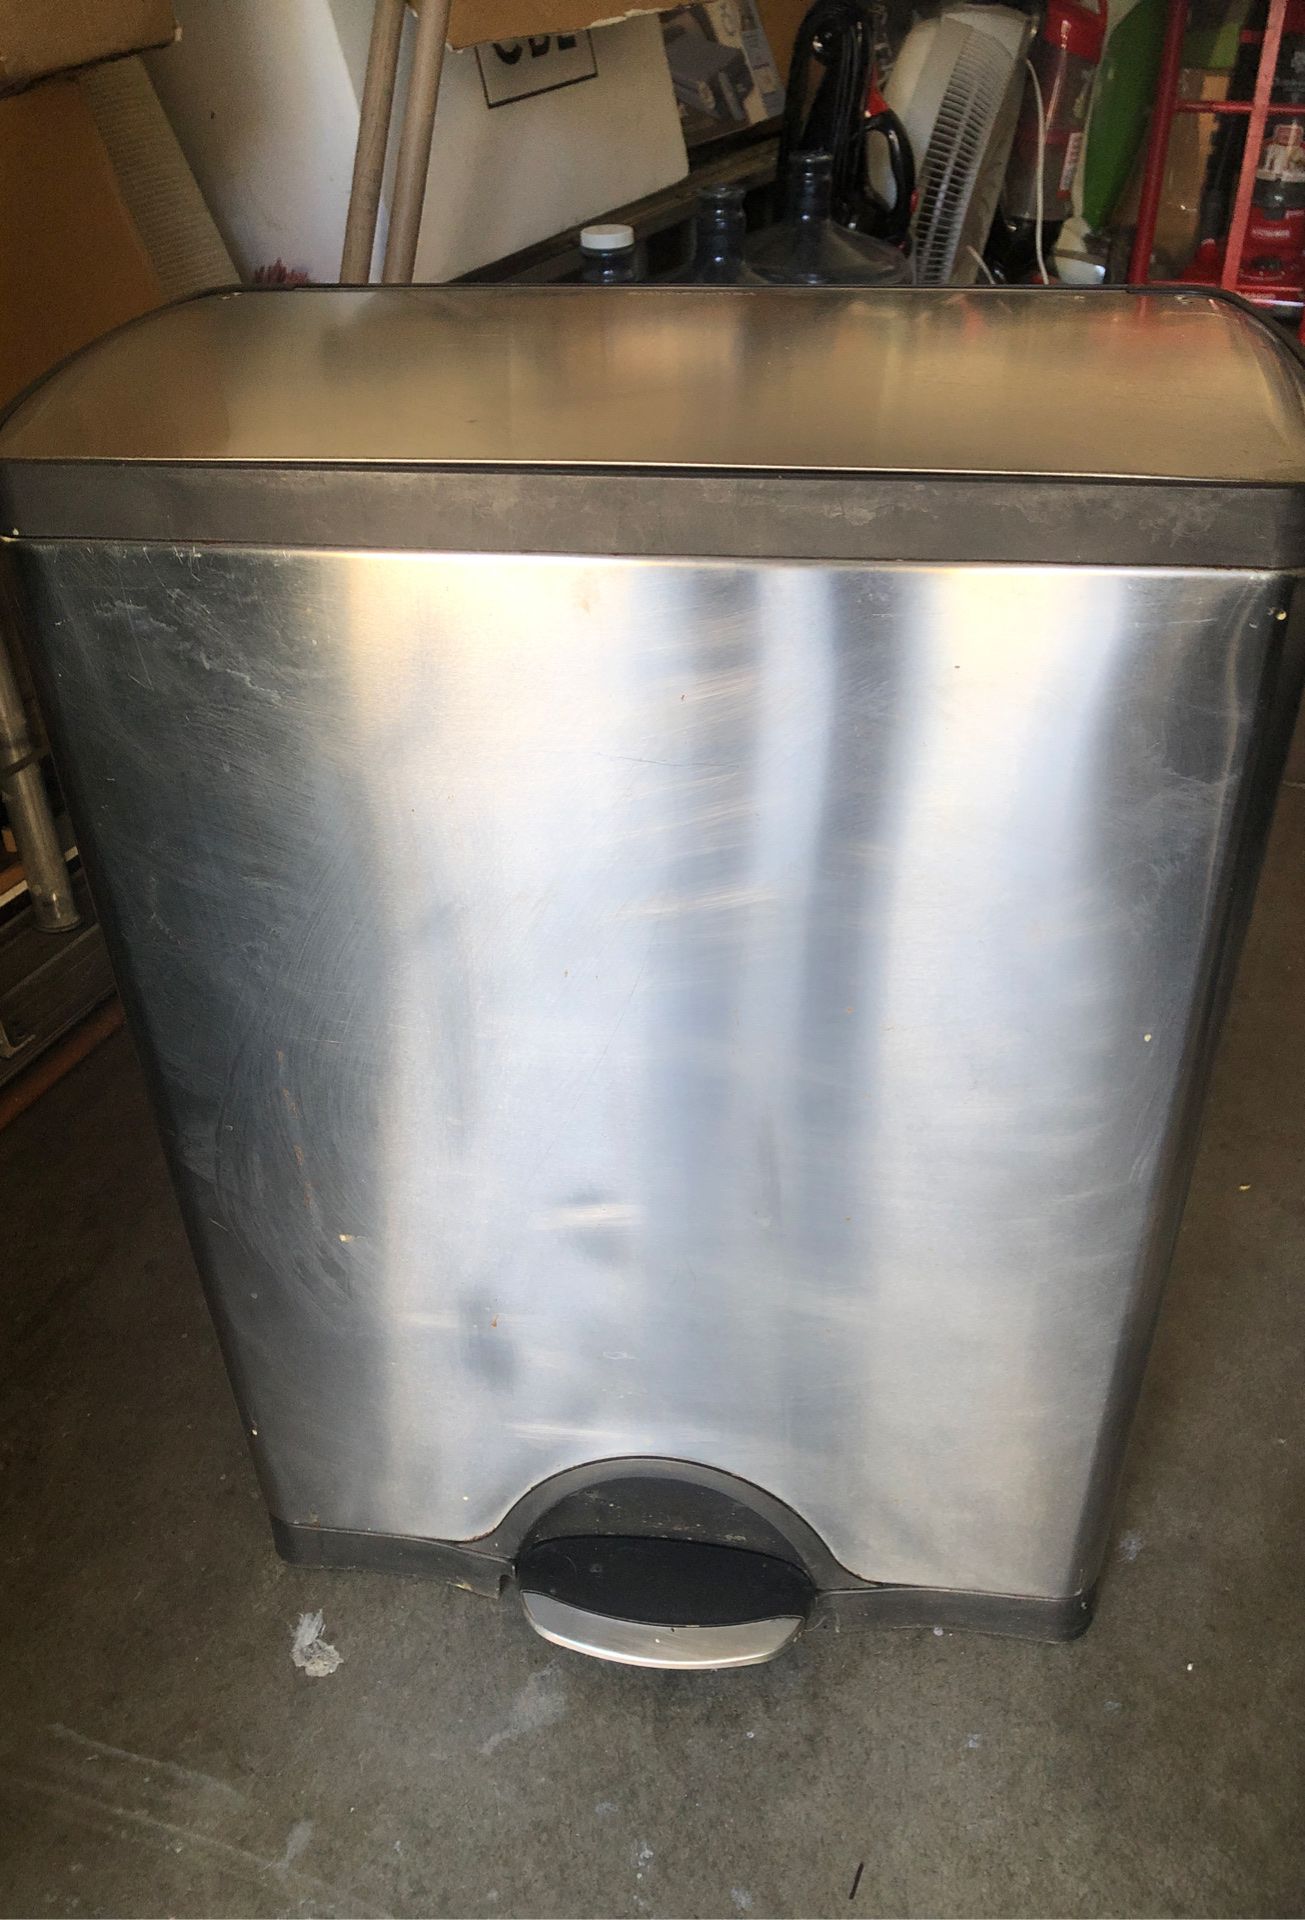 SIMPLEHUMAN Big trash can, look new. Morning need a new home. $15. Size 26” T X 19” W and 10” D.